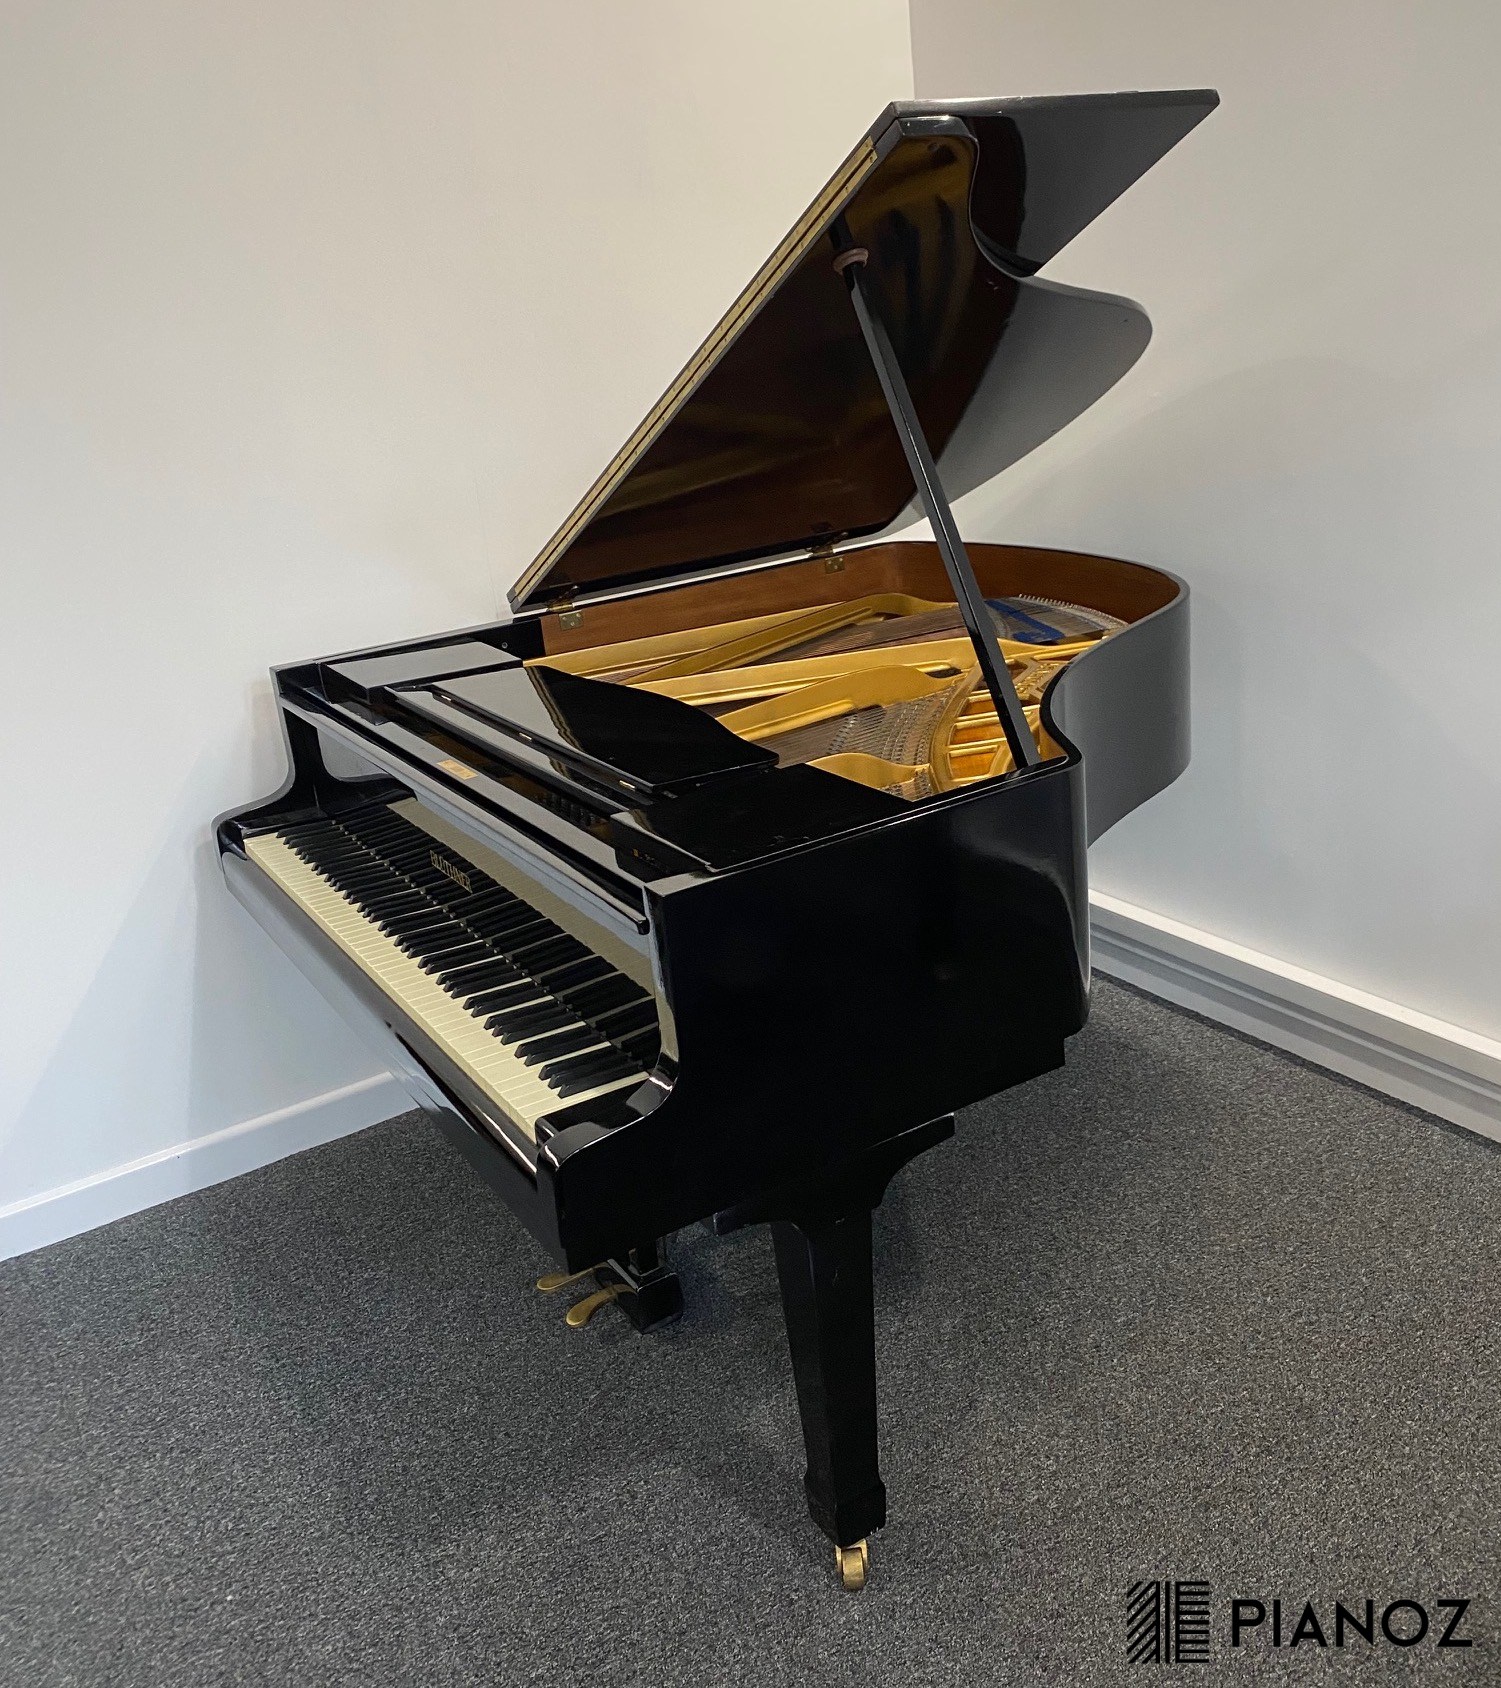 Bluthner Black Gloss Baby Grand Piano piano for sale in UK